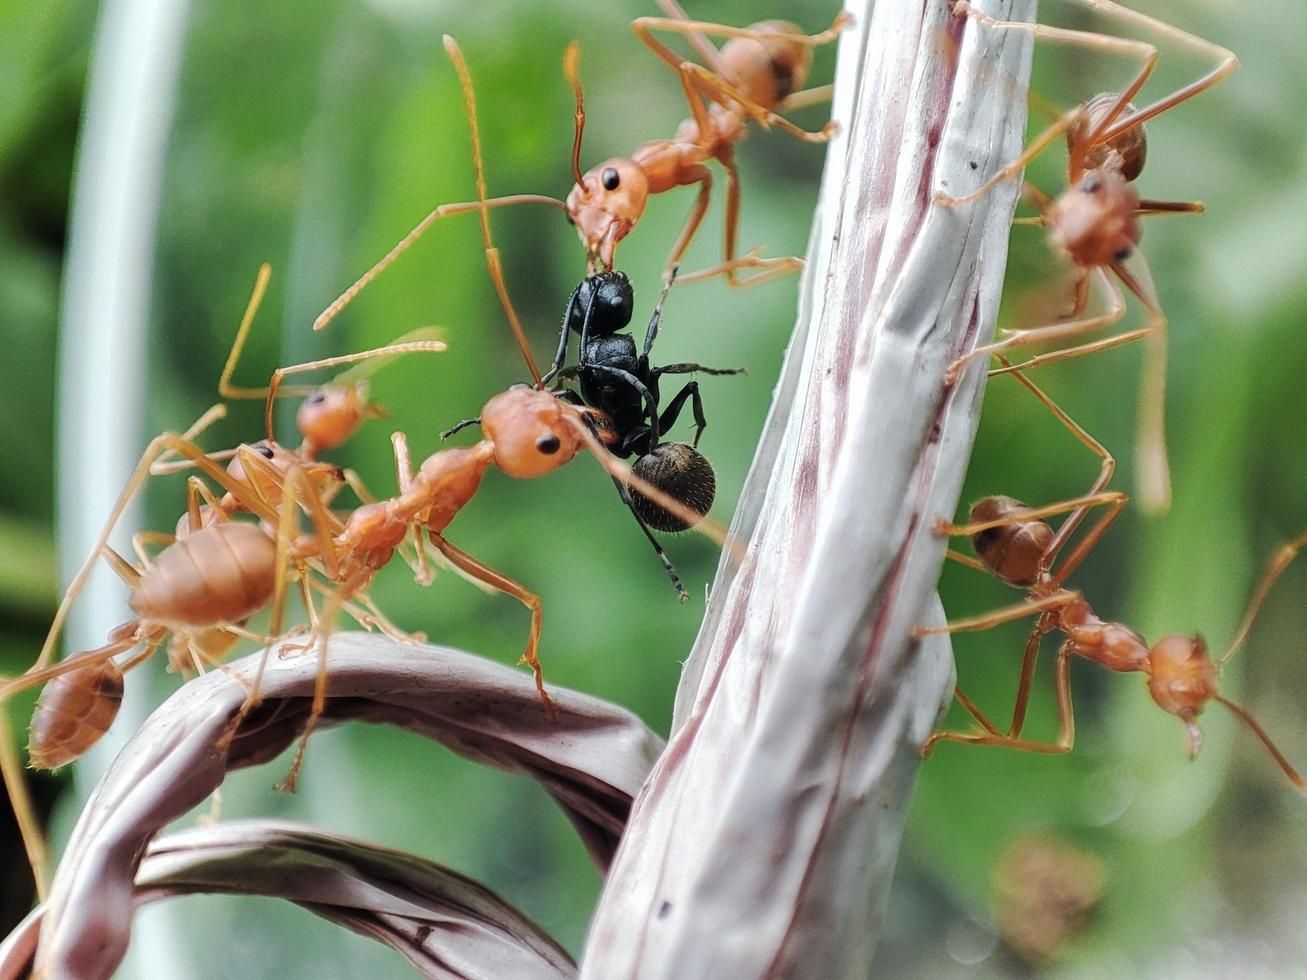 weaver ants are preying on other ants. photo